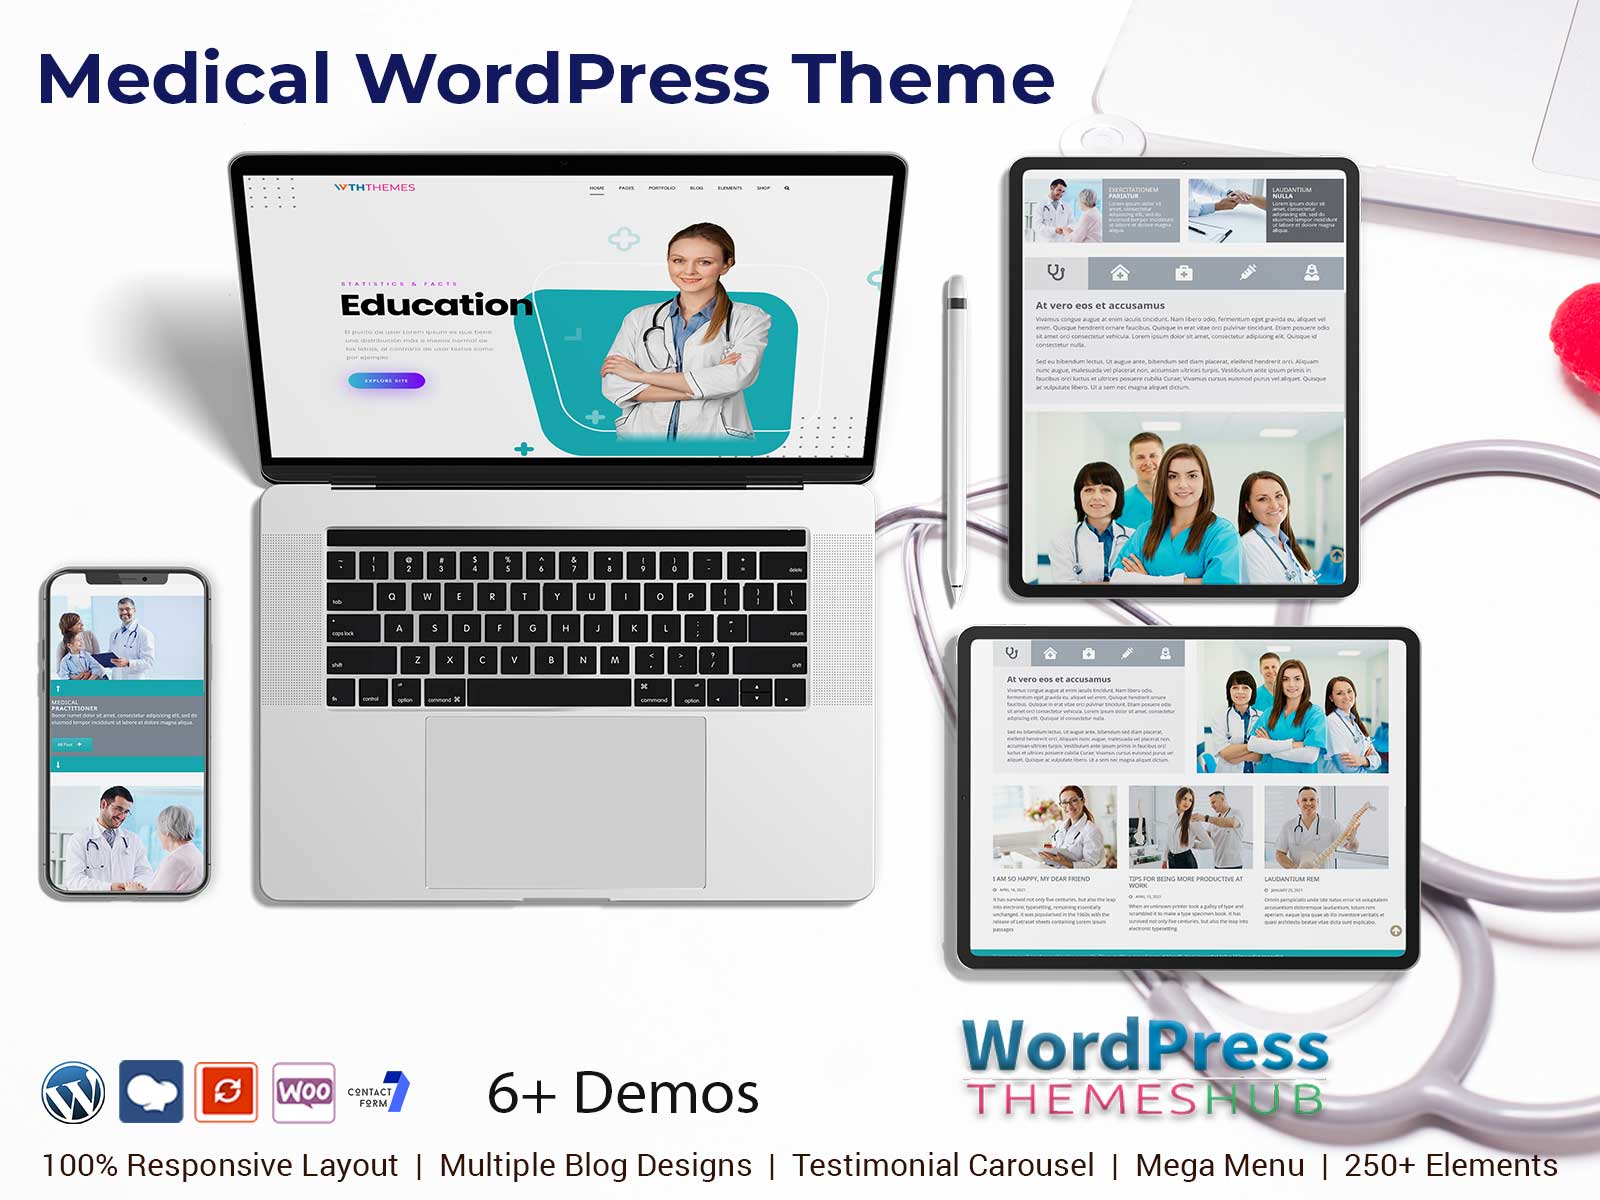 Medical WordPress Theme for Medical And Health-related Websites